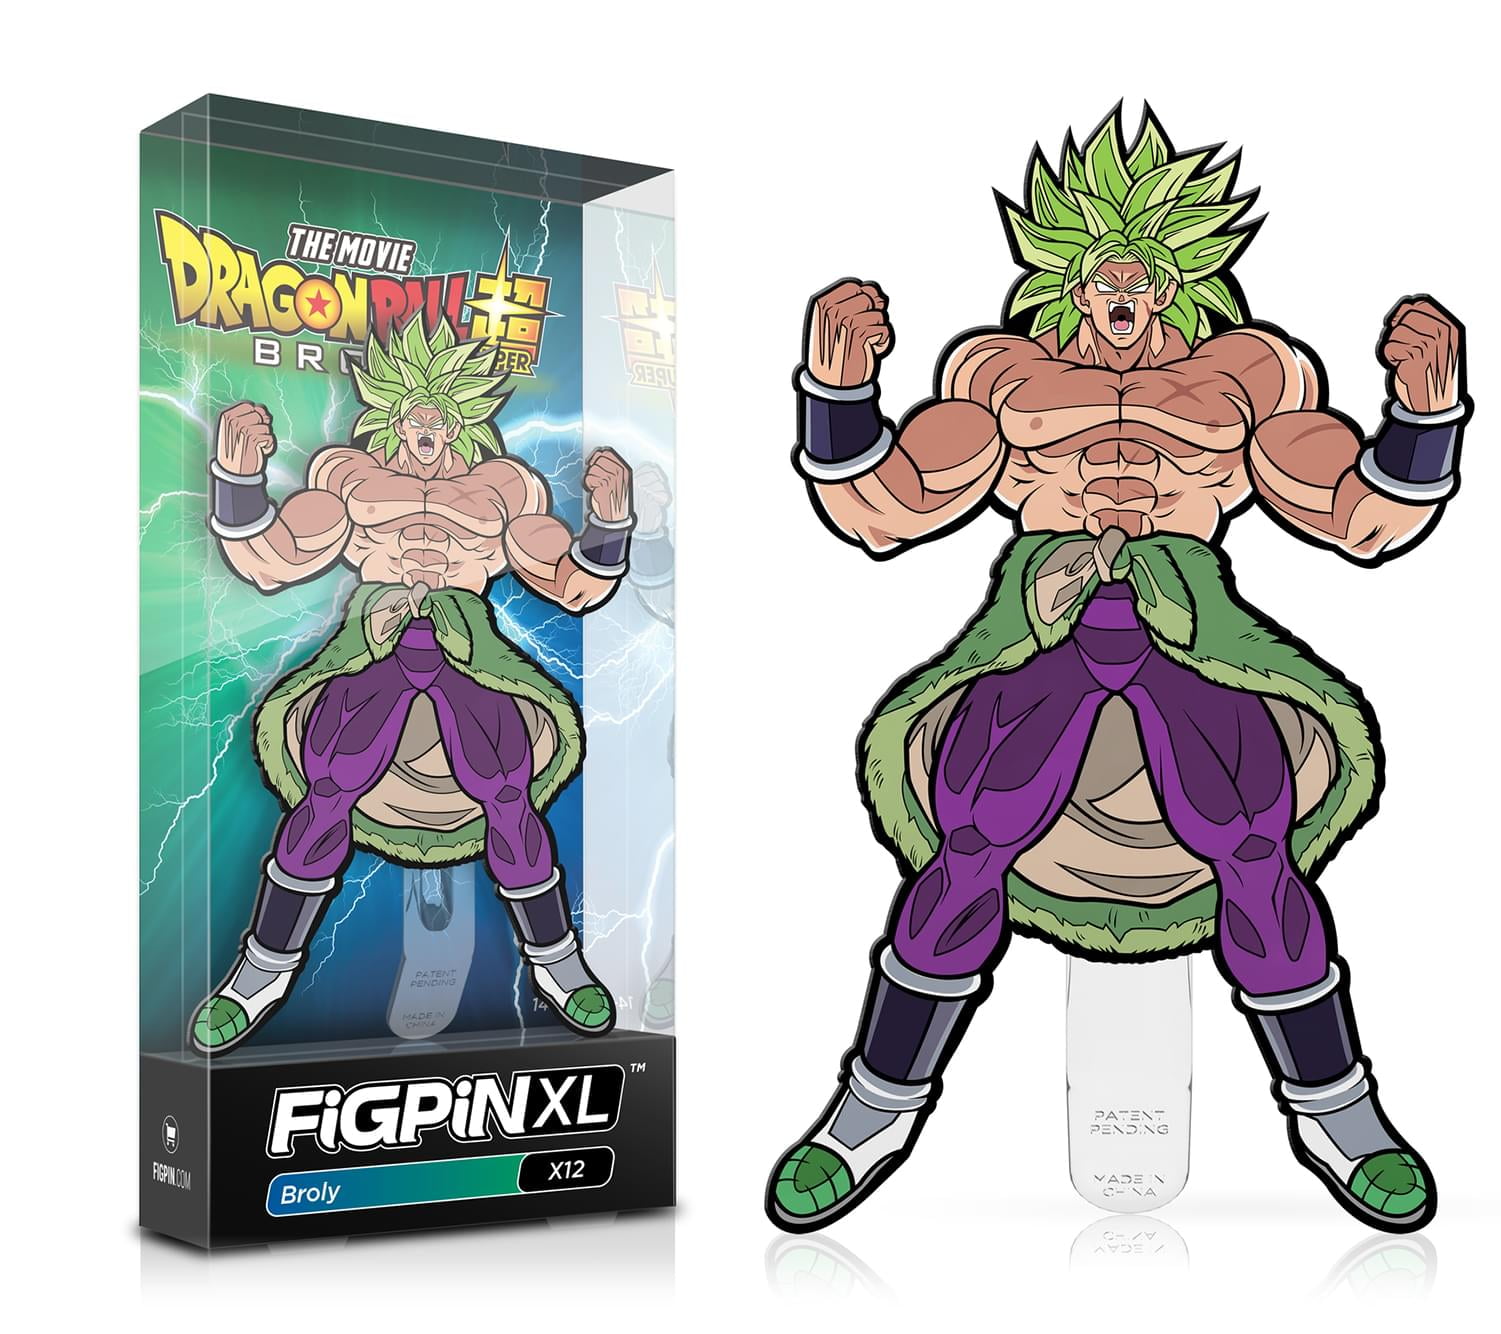 FiGPiN XL The Movie Dragon Ball Super Broly X12 In stock 